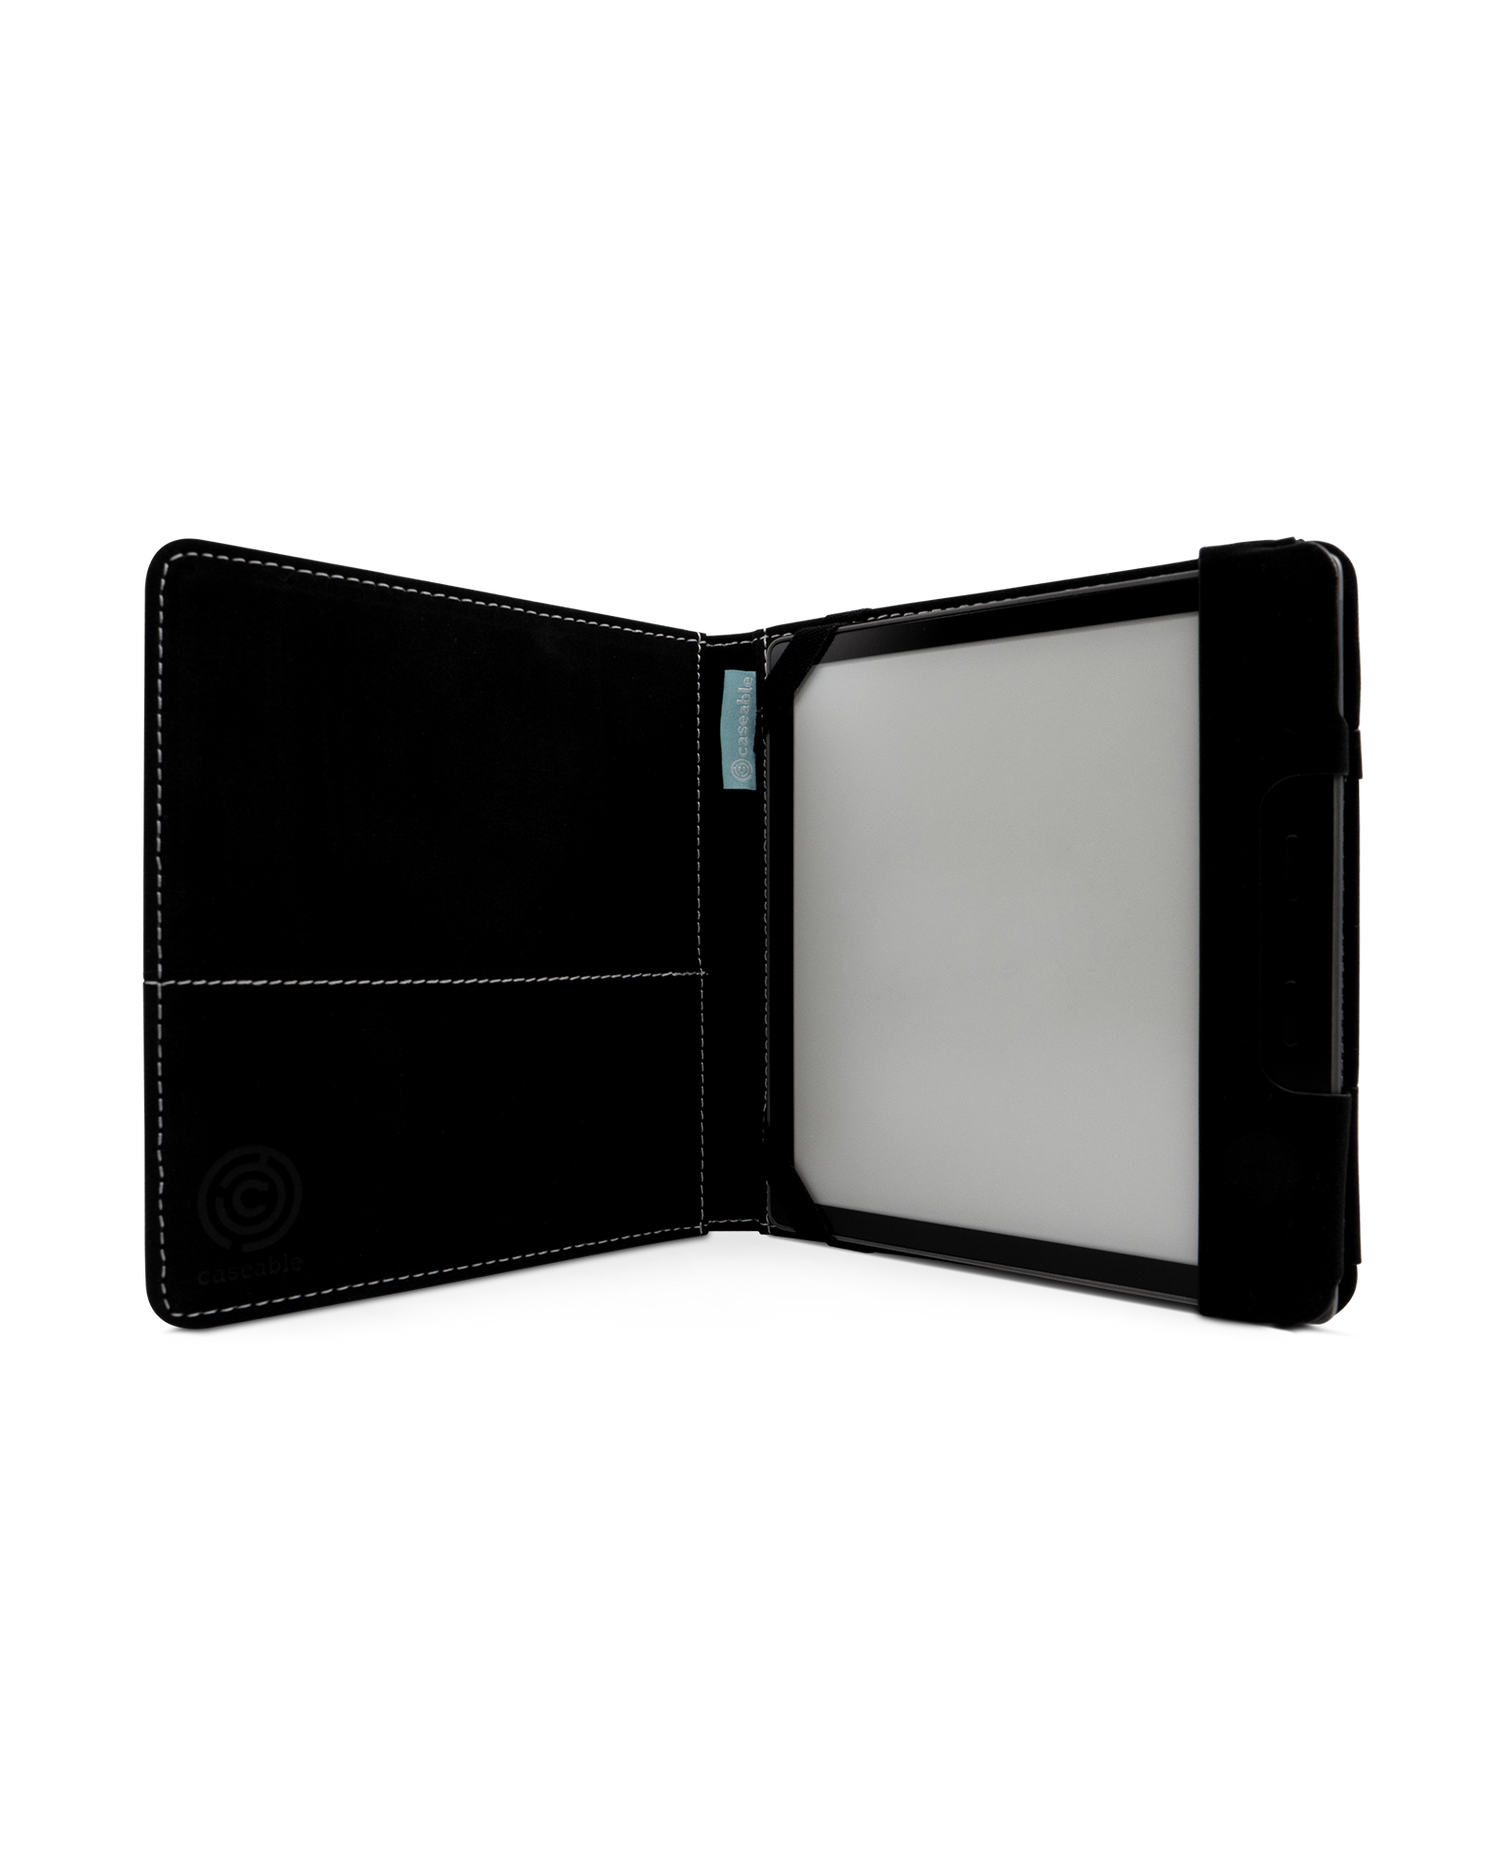 Electric Ocean 2 eReader Case for tolino vision 6: Opened interior view